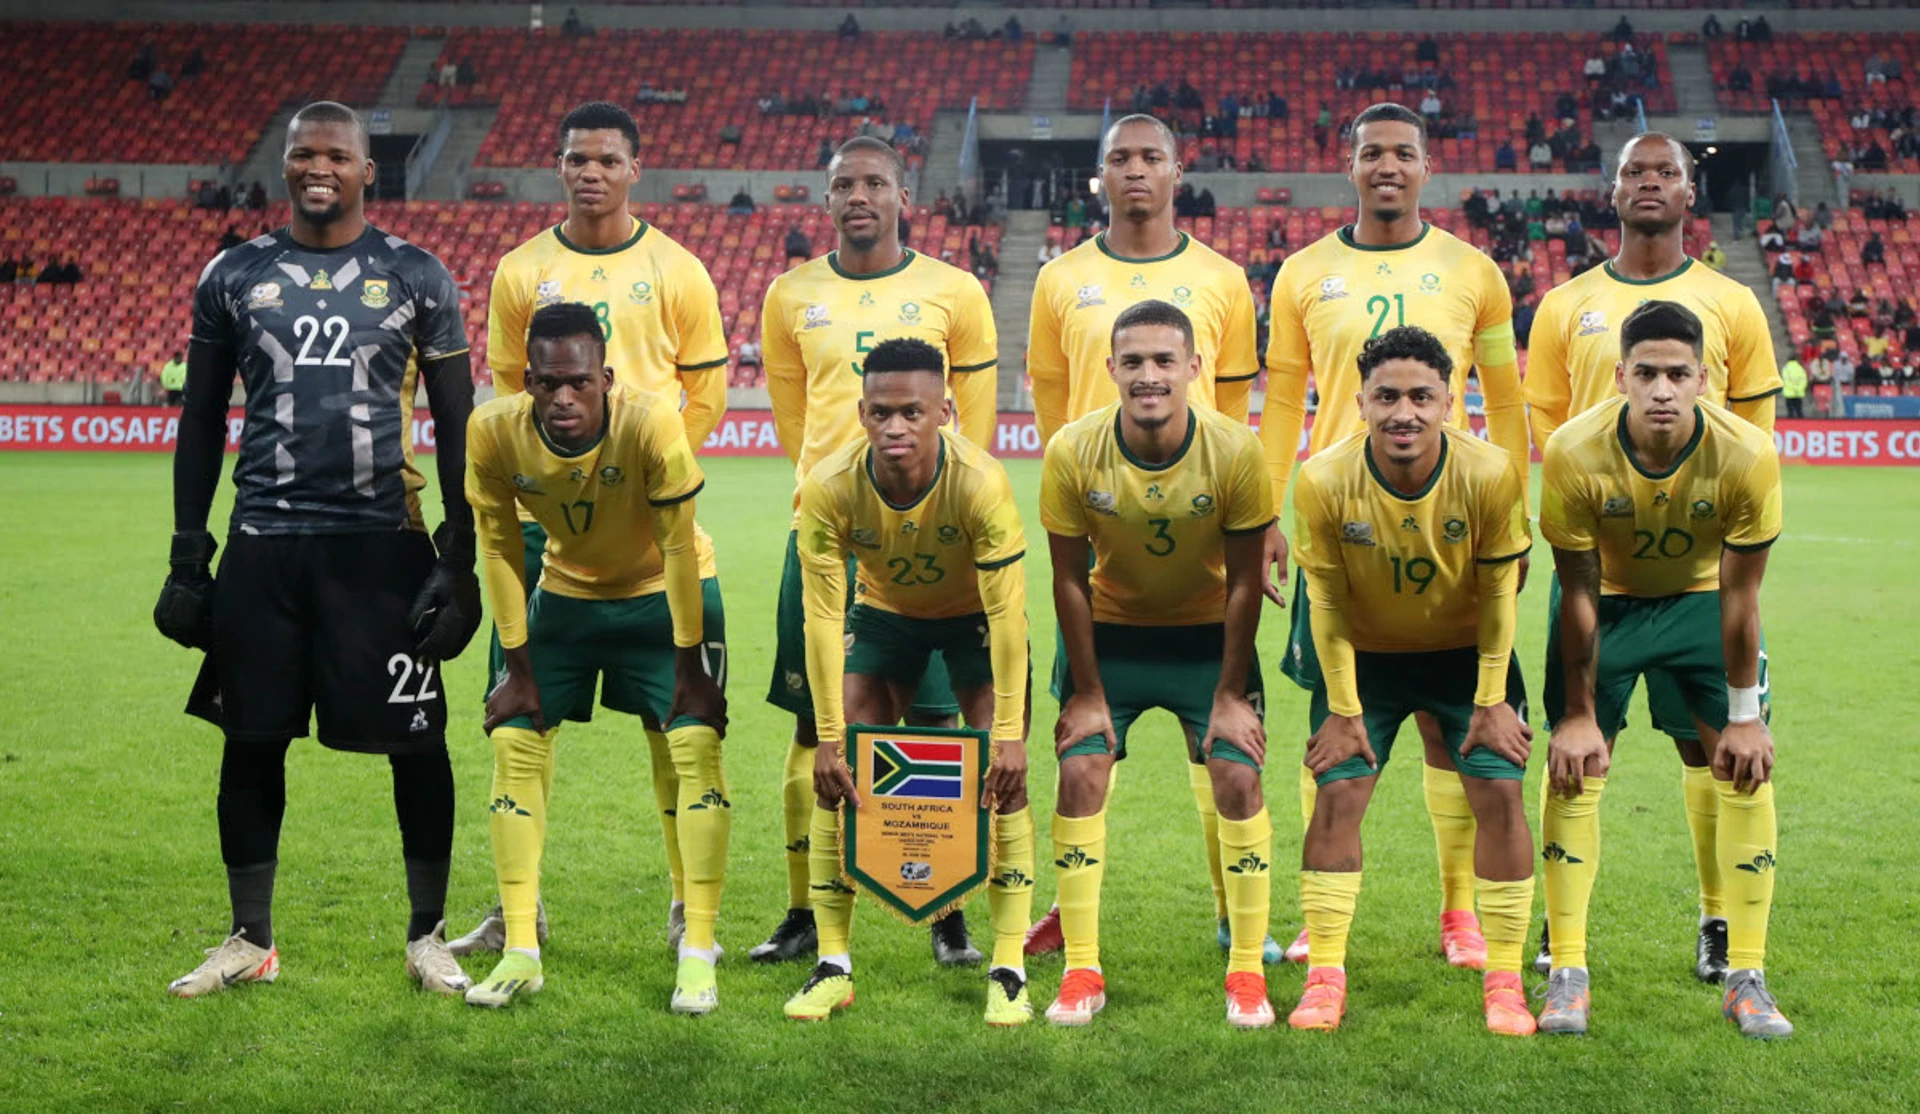 PREVIEW: Bafana face Eswatini with Cosafa Cup semifinal berth on the line